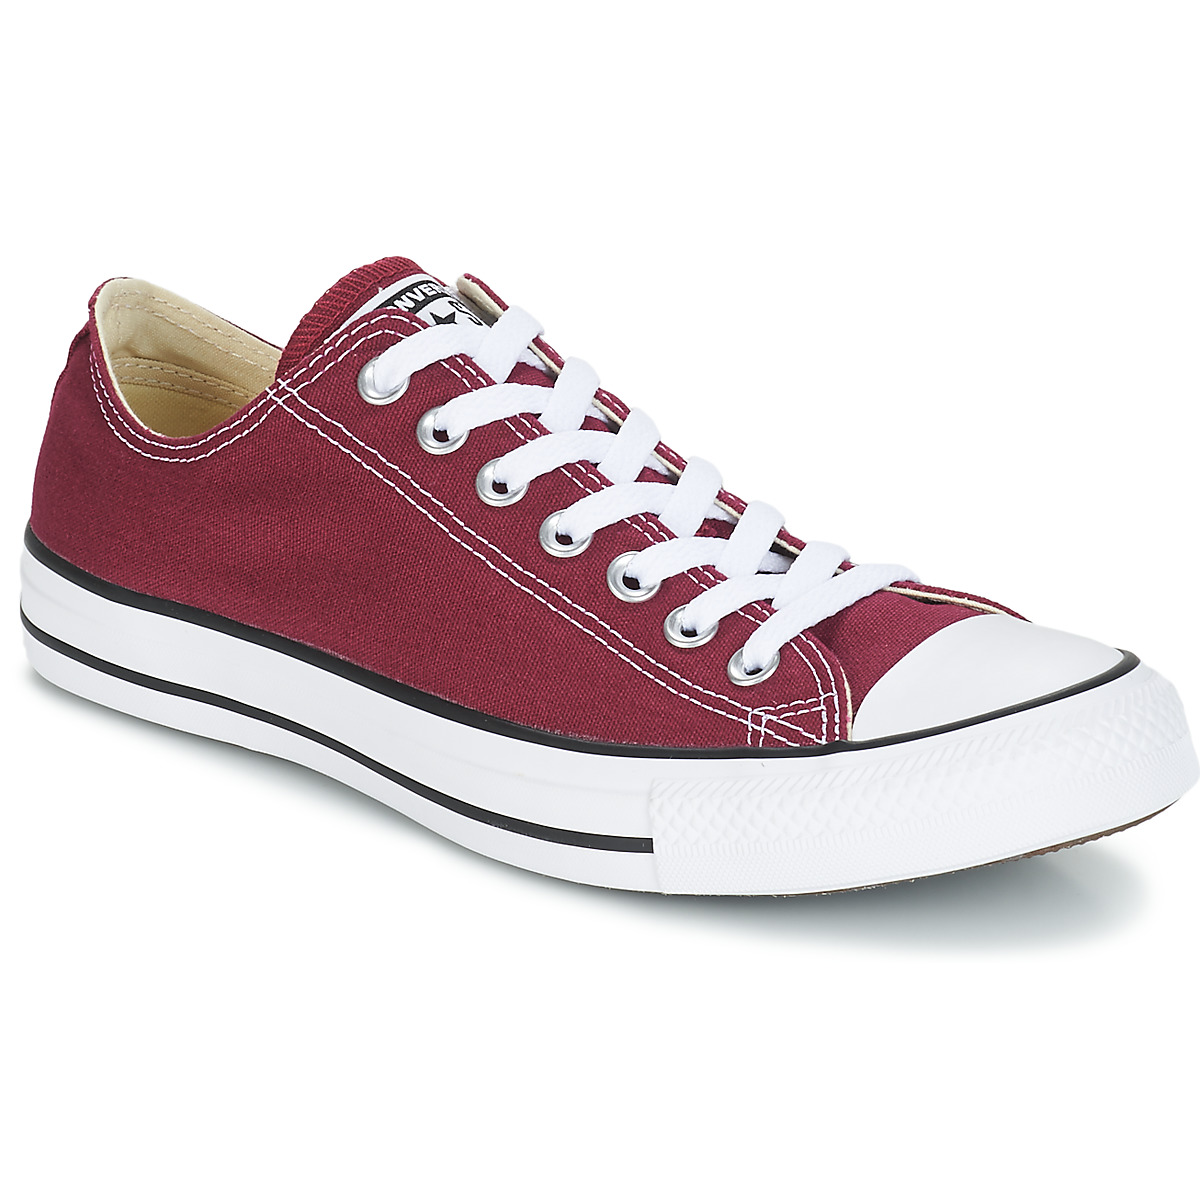 Converse CHUCK TAYLOR ALL STAR CORE OX Bordeaux Free delivery | NET ! Shoes Low top trainers